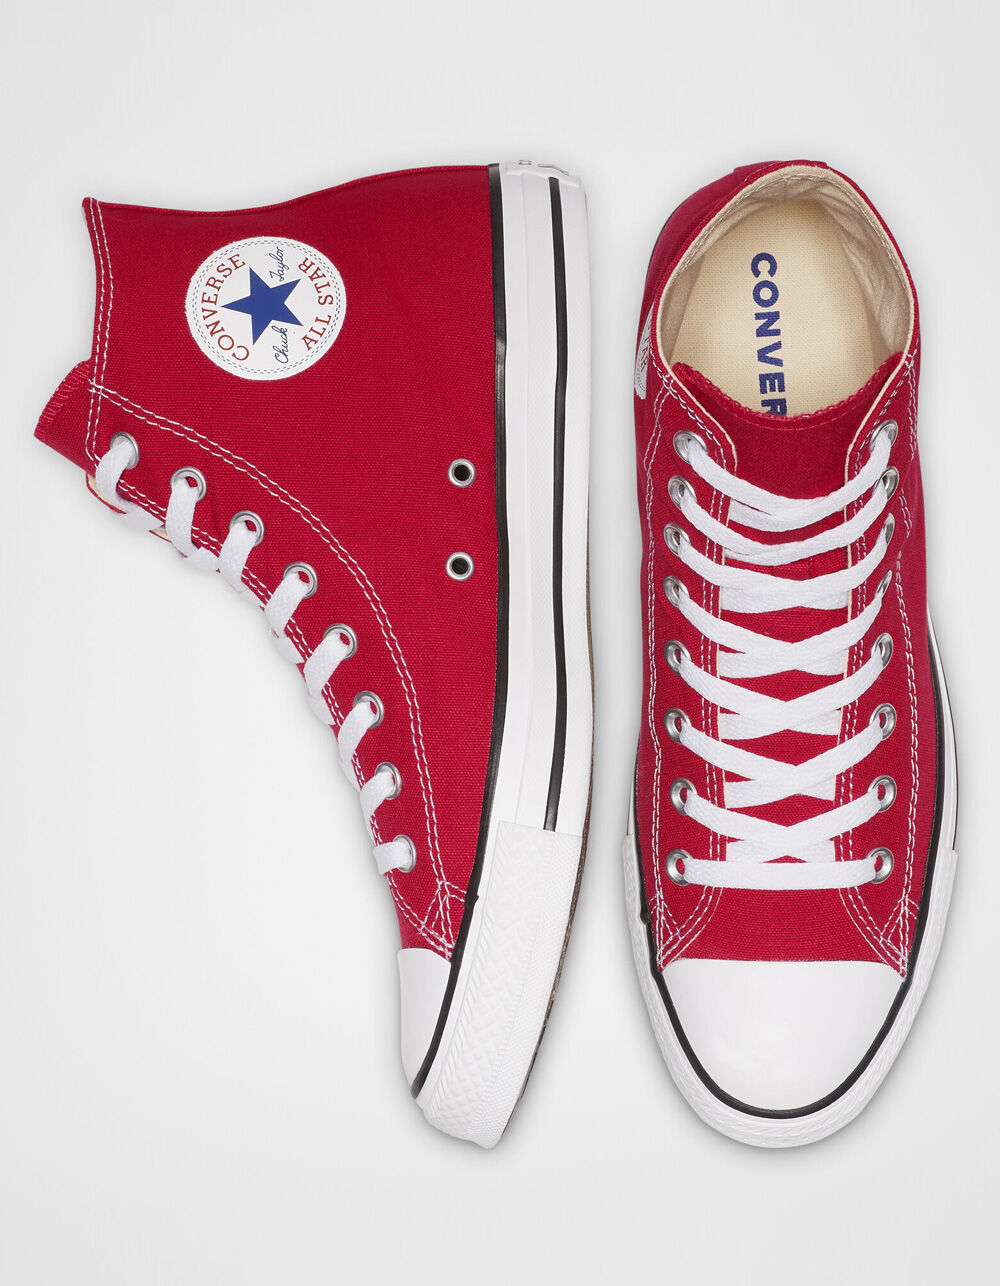 Converse Chuck Taylor All Star Hi Sneaker Red Journeys, 50% OFF